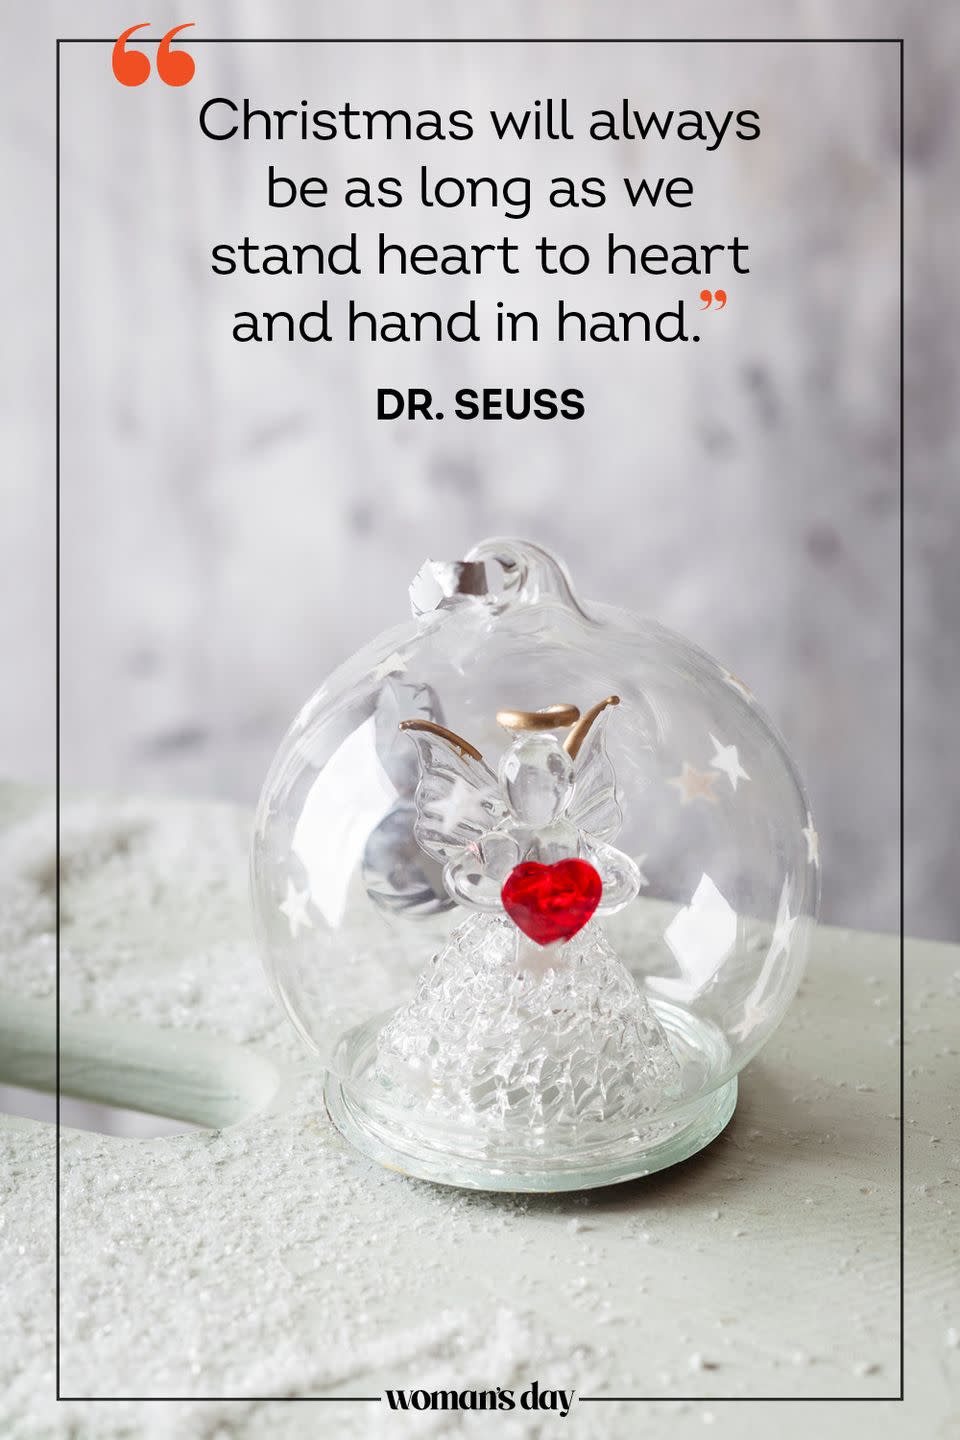 <p>“Christmas will always be as long as we stand heart to heart and hand in hand." — Dr. Seuss</p>